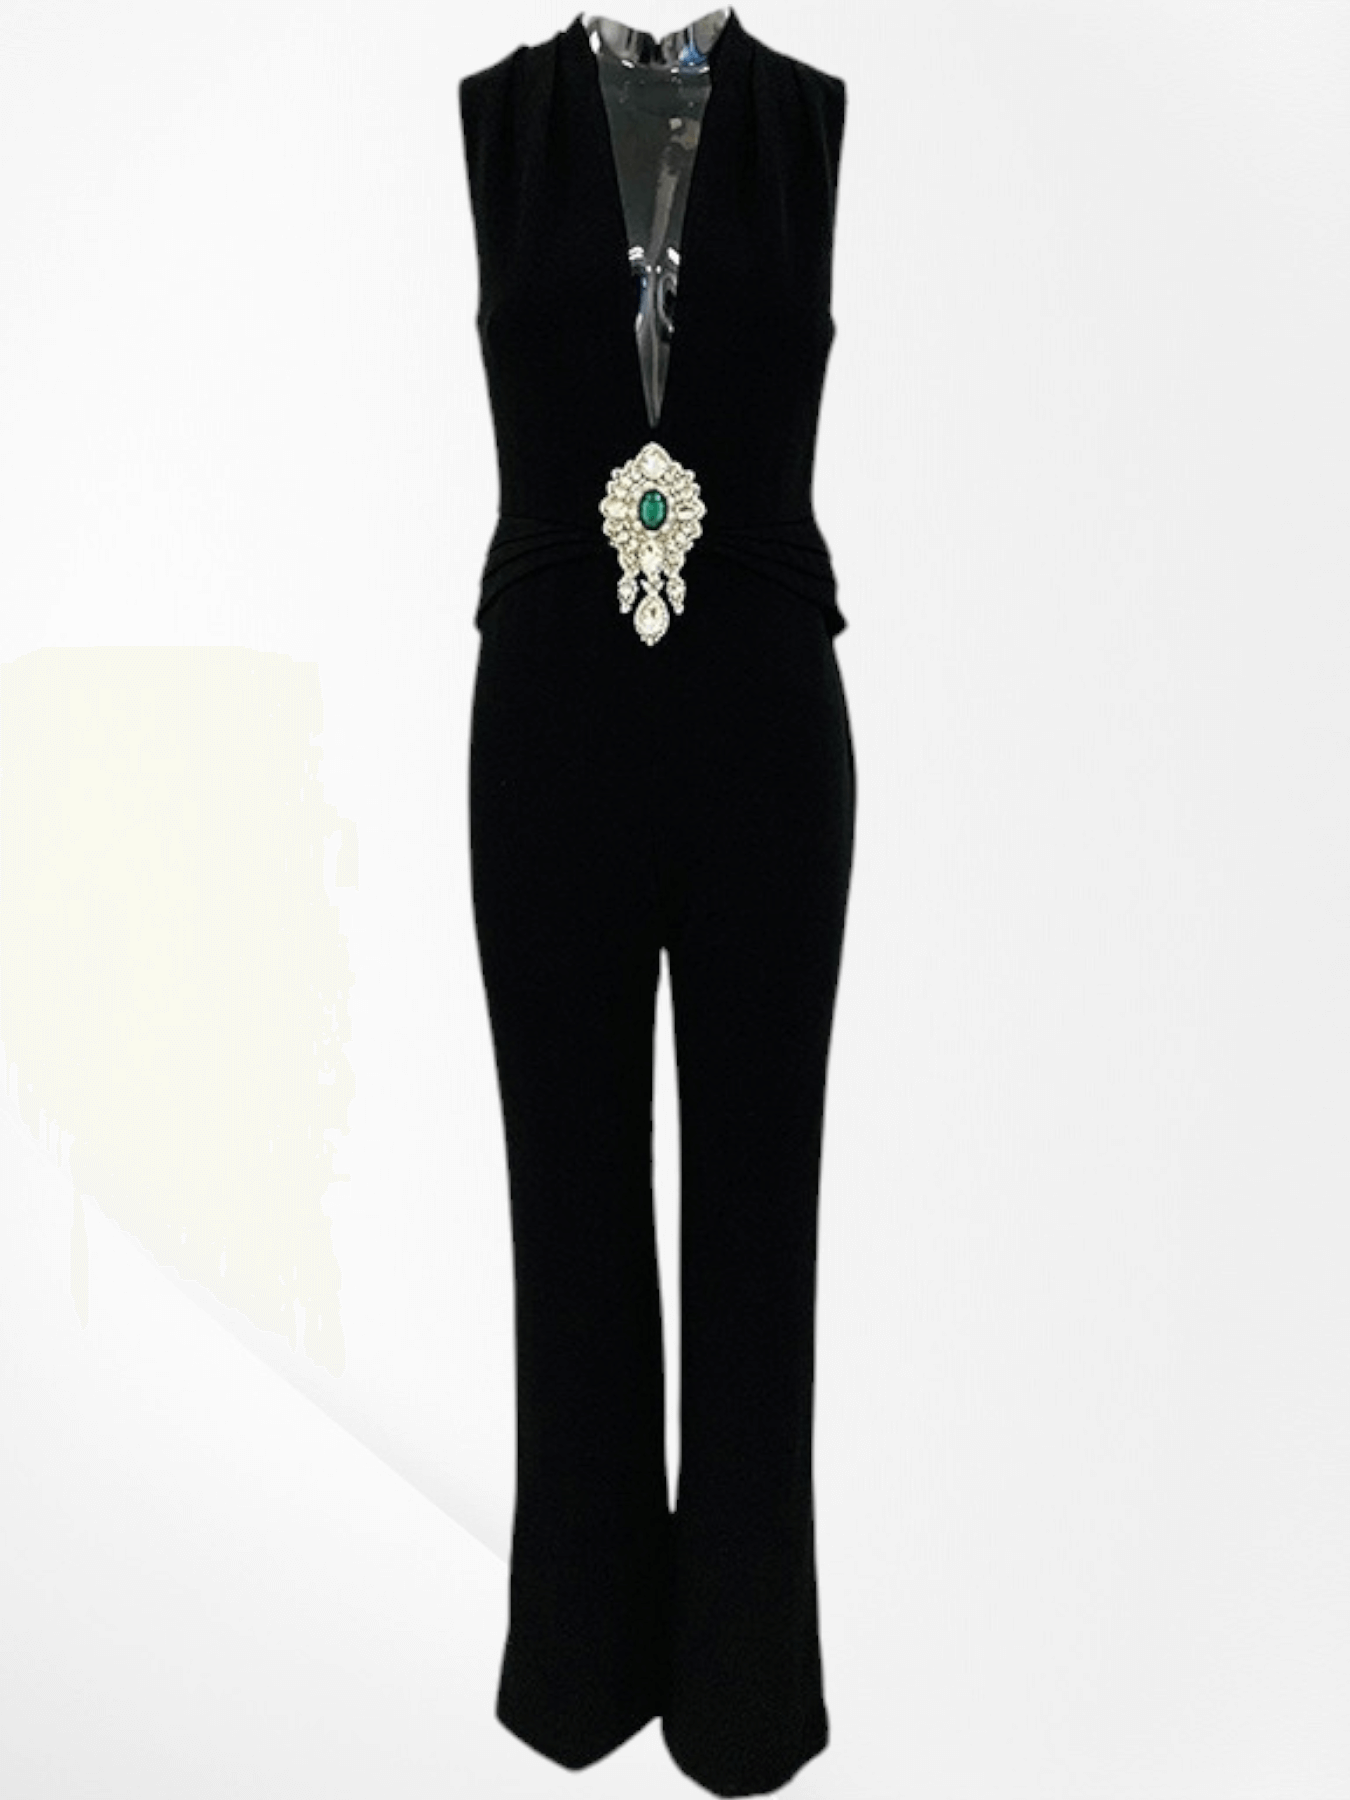 Stunning jumpsuit adorned with intricate beaded diamond embellishments for a glamorous look